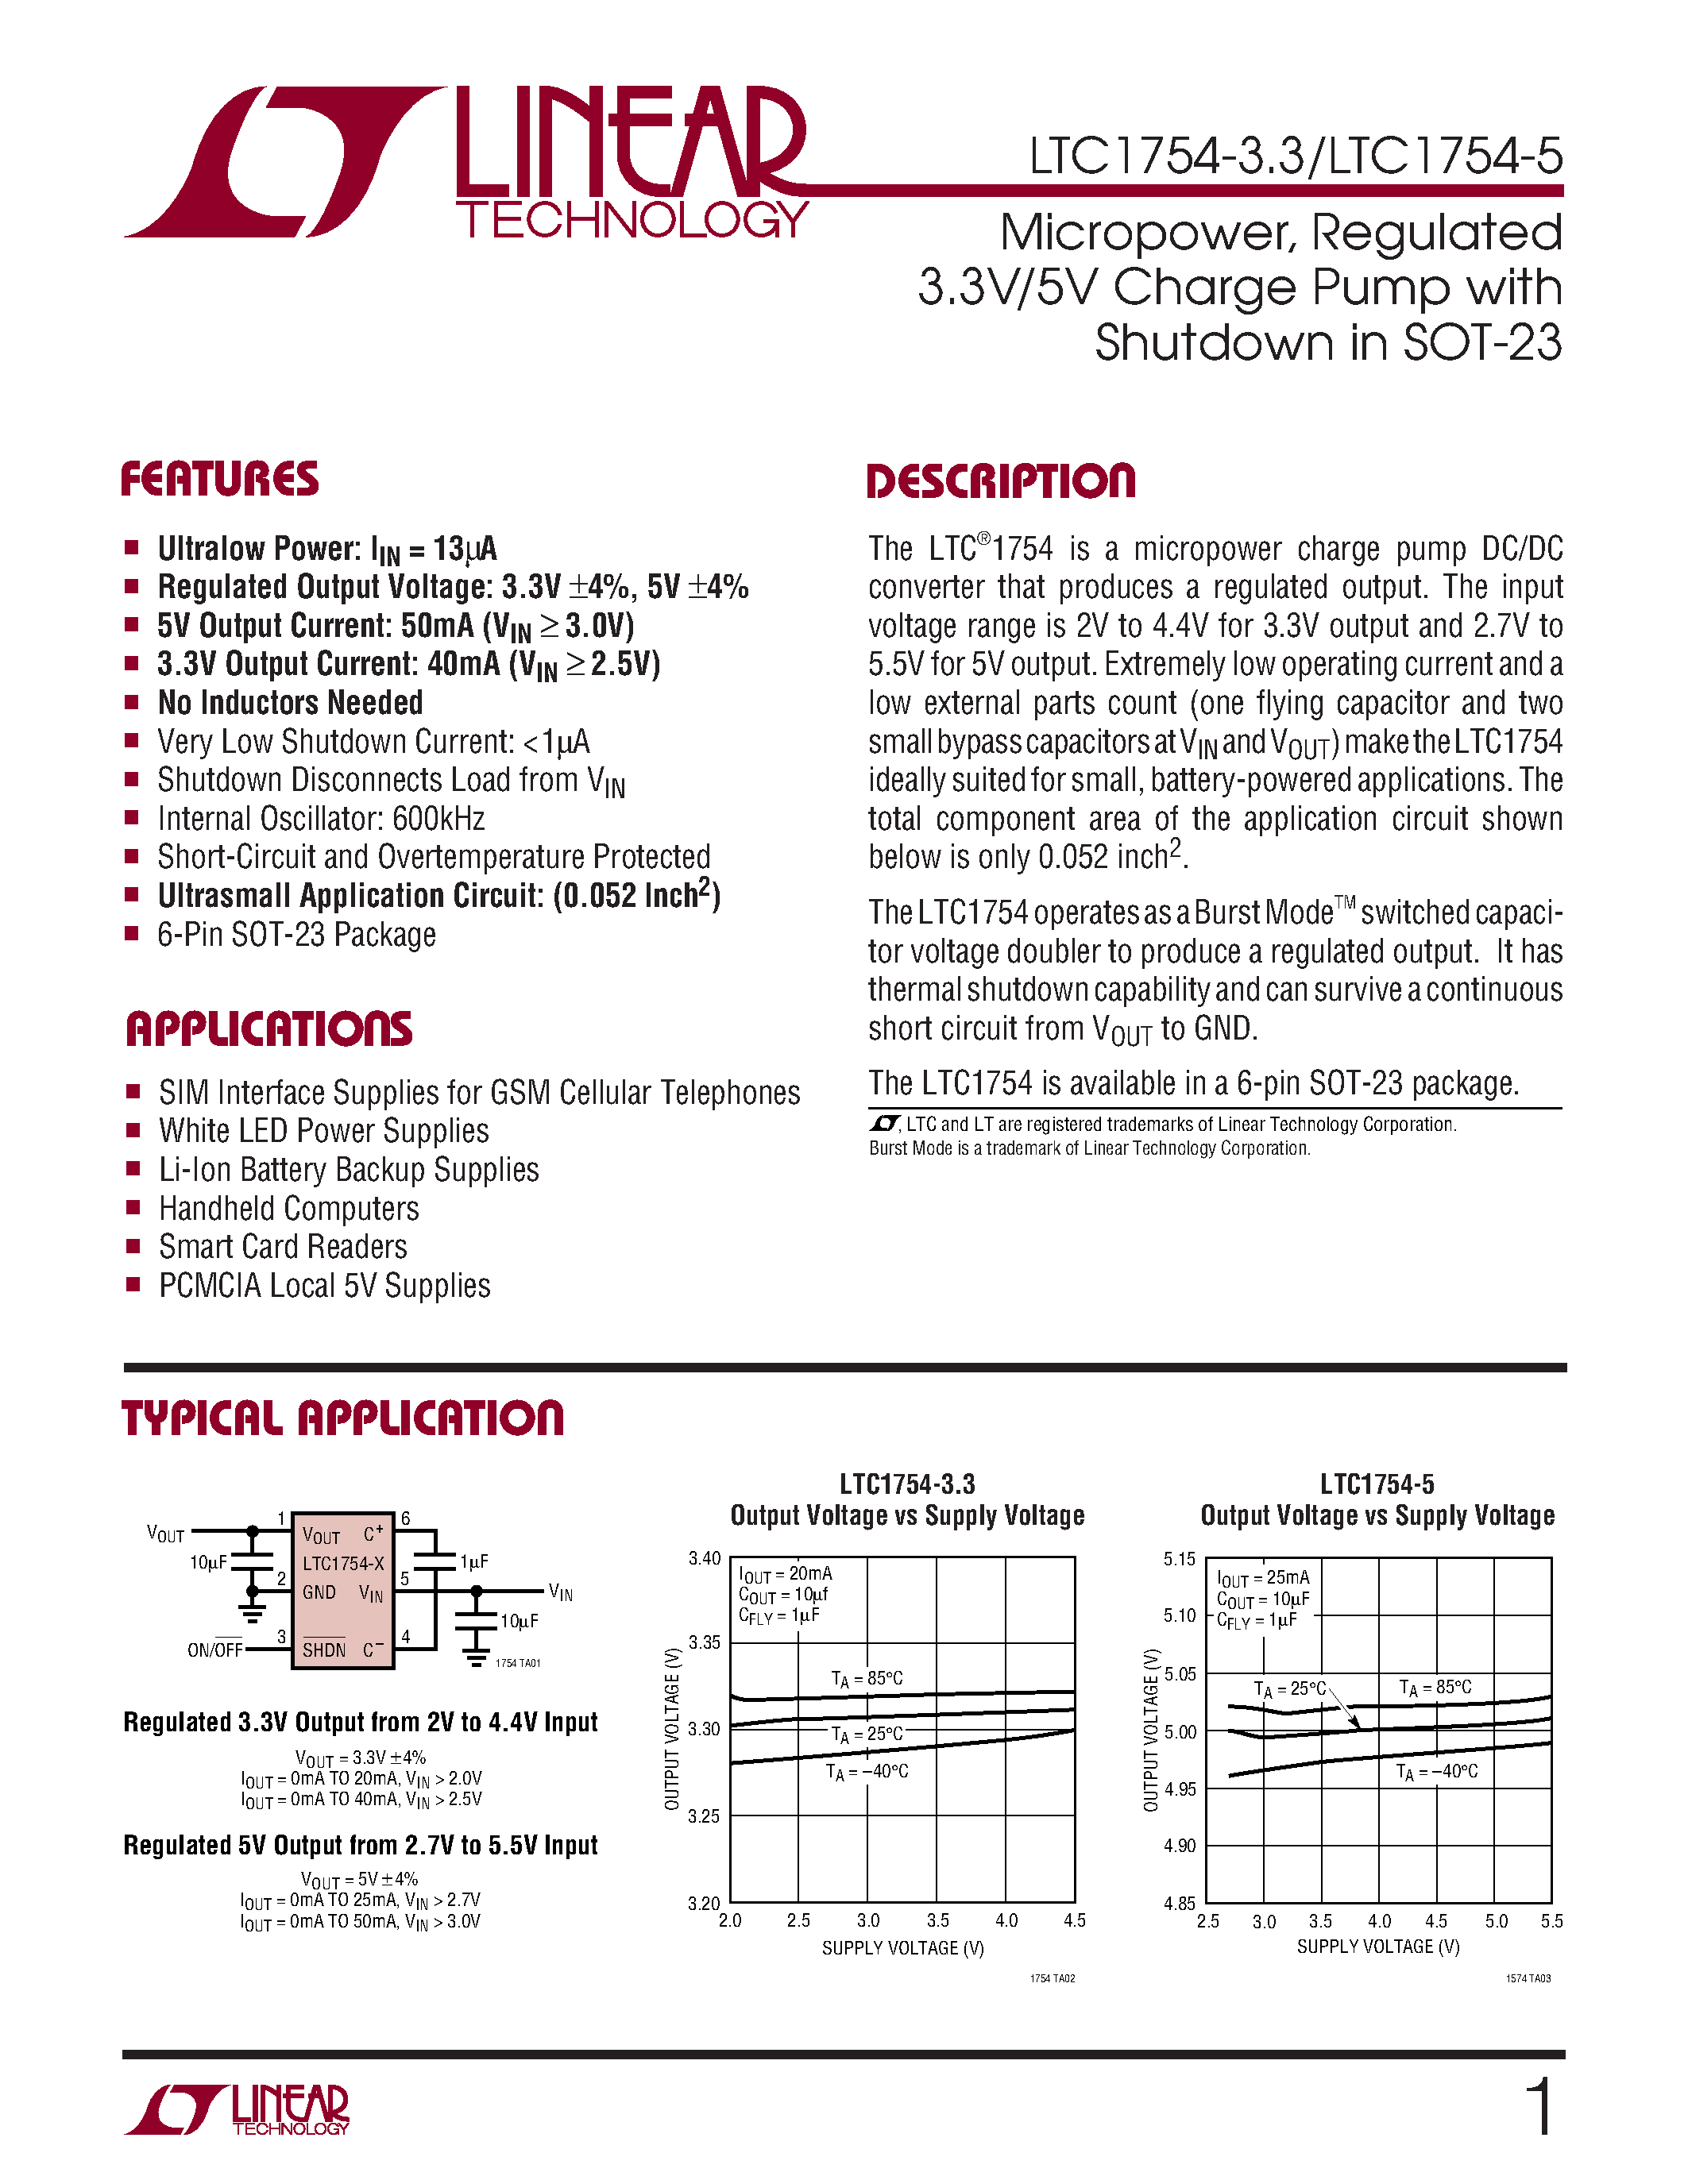 Datasheet LTC1754-3.3 - Micropower/ Regulated 3.3V/5V Charge Pump with Shutdown in SOT-23 page 1